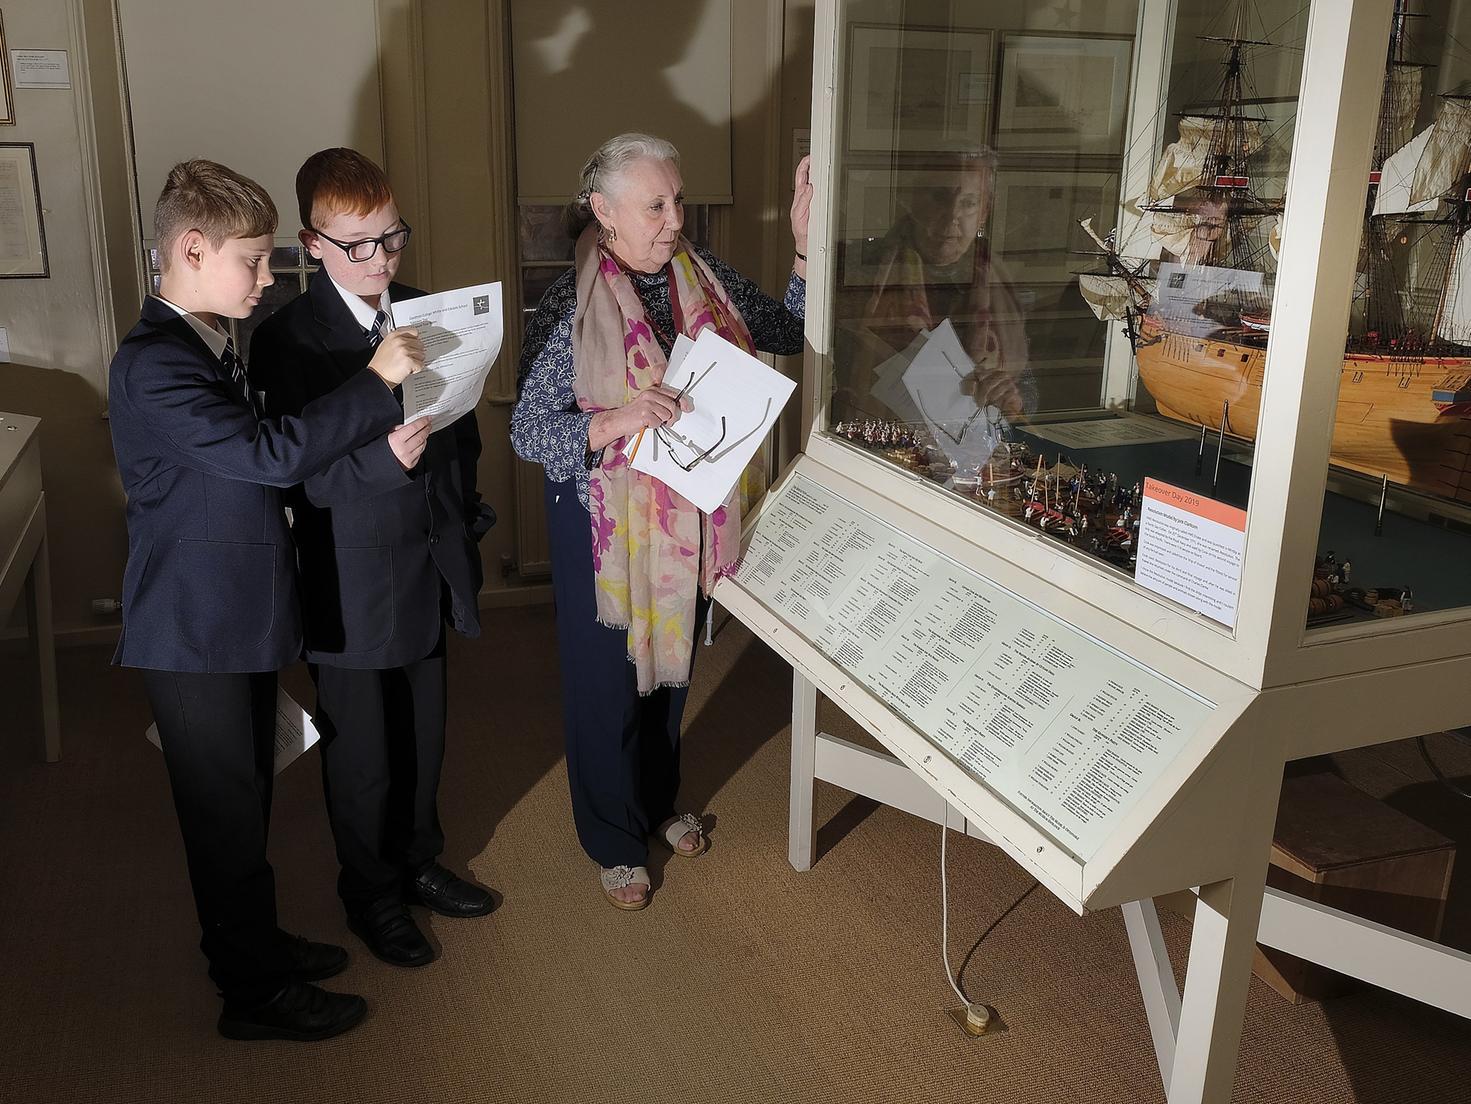 Students Charlie and Jack with Volunteer Coreen Parkinson in one the display rooms, 1950140b.